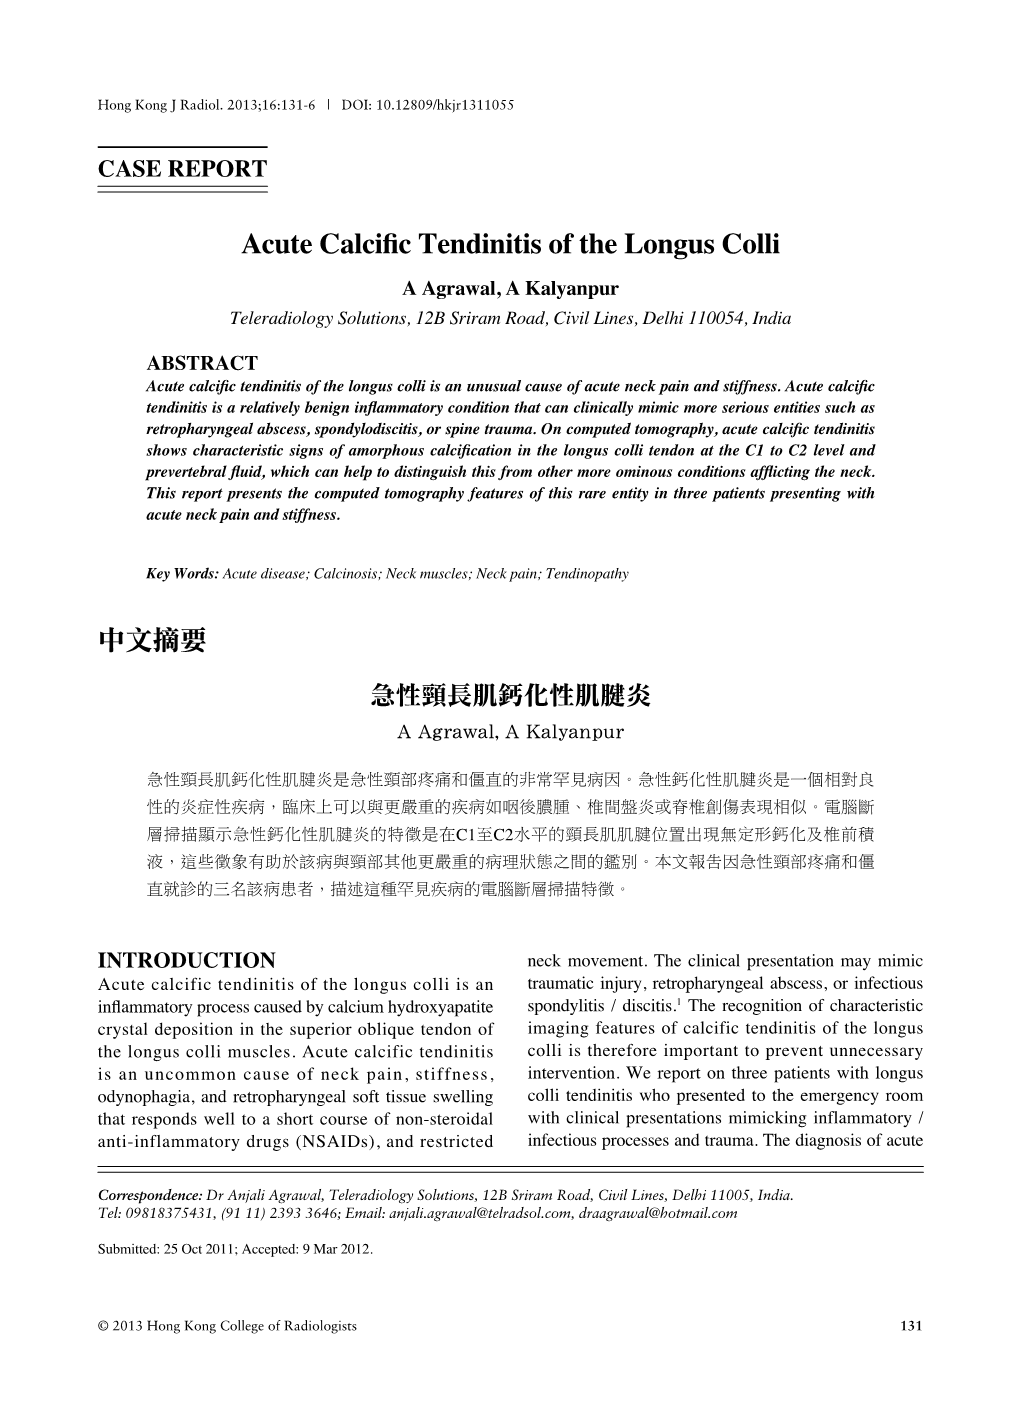 Acute Calcific Tendinitis of the Longus Colli Is an Unusual Cause of Acute Neck Pain and Stiffness